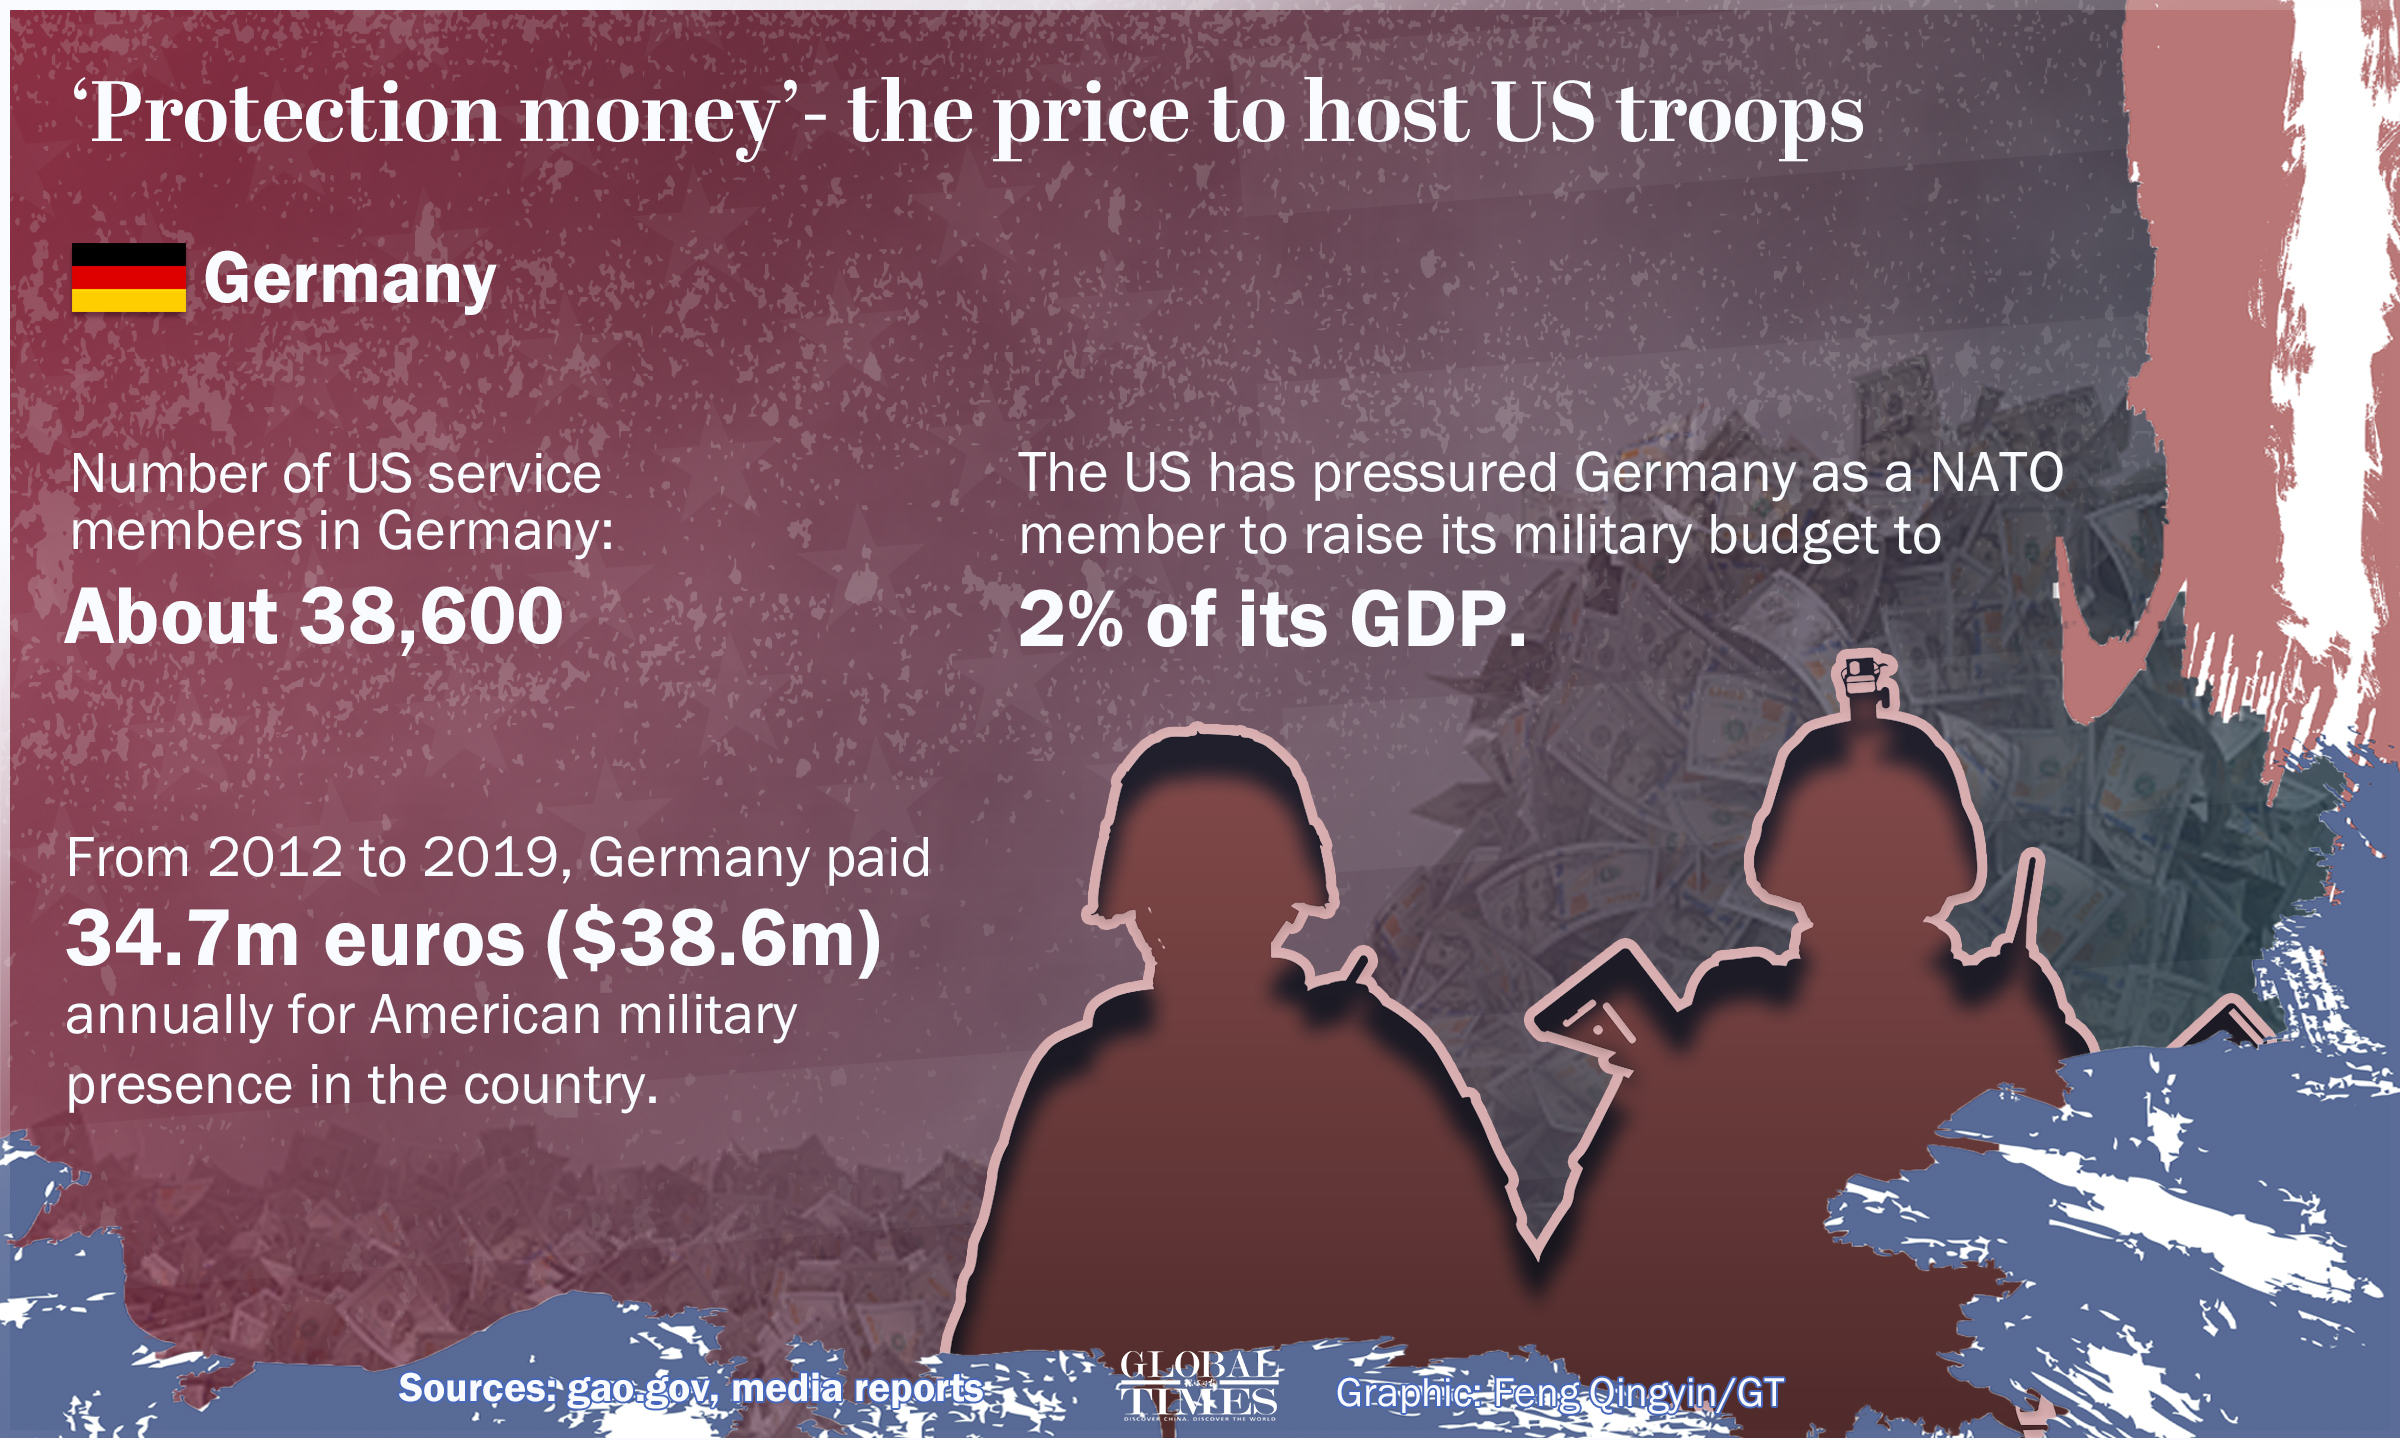 ‘Protection money’- the price to host US troops Graphic: Feng Qingyin/GT